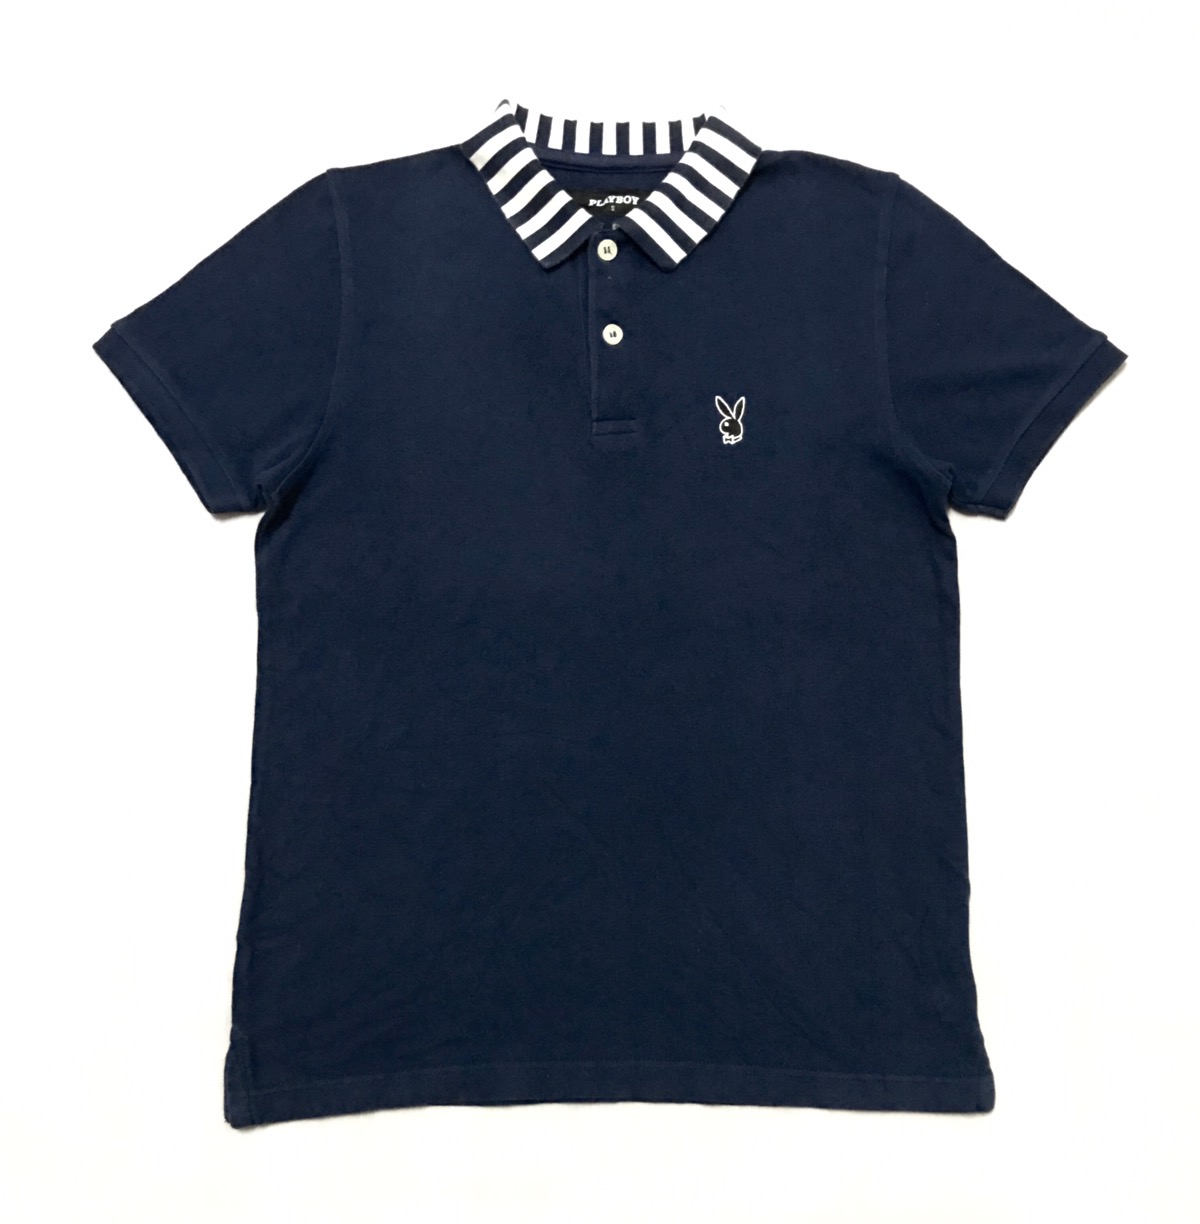 Playboy - Playboy polos for women’s - 1